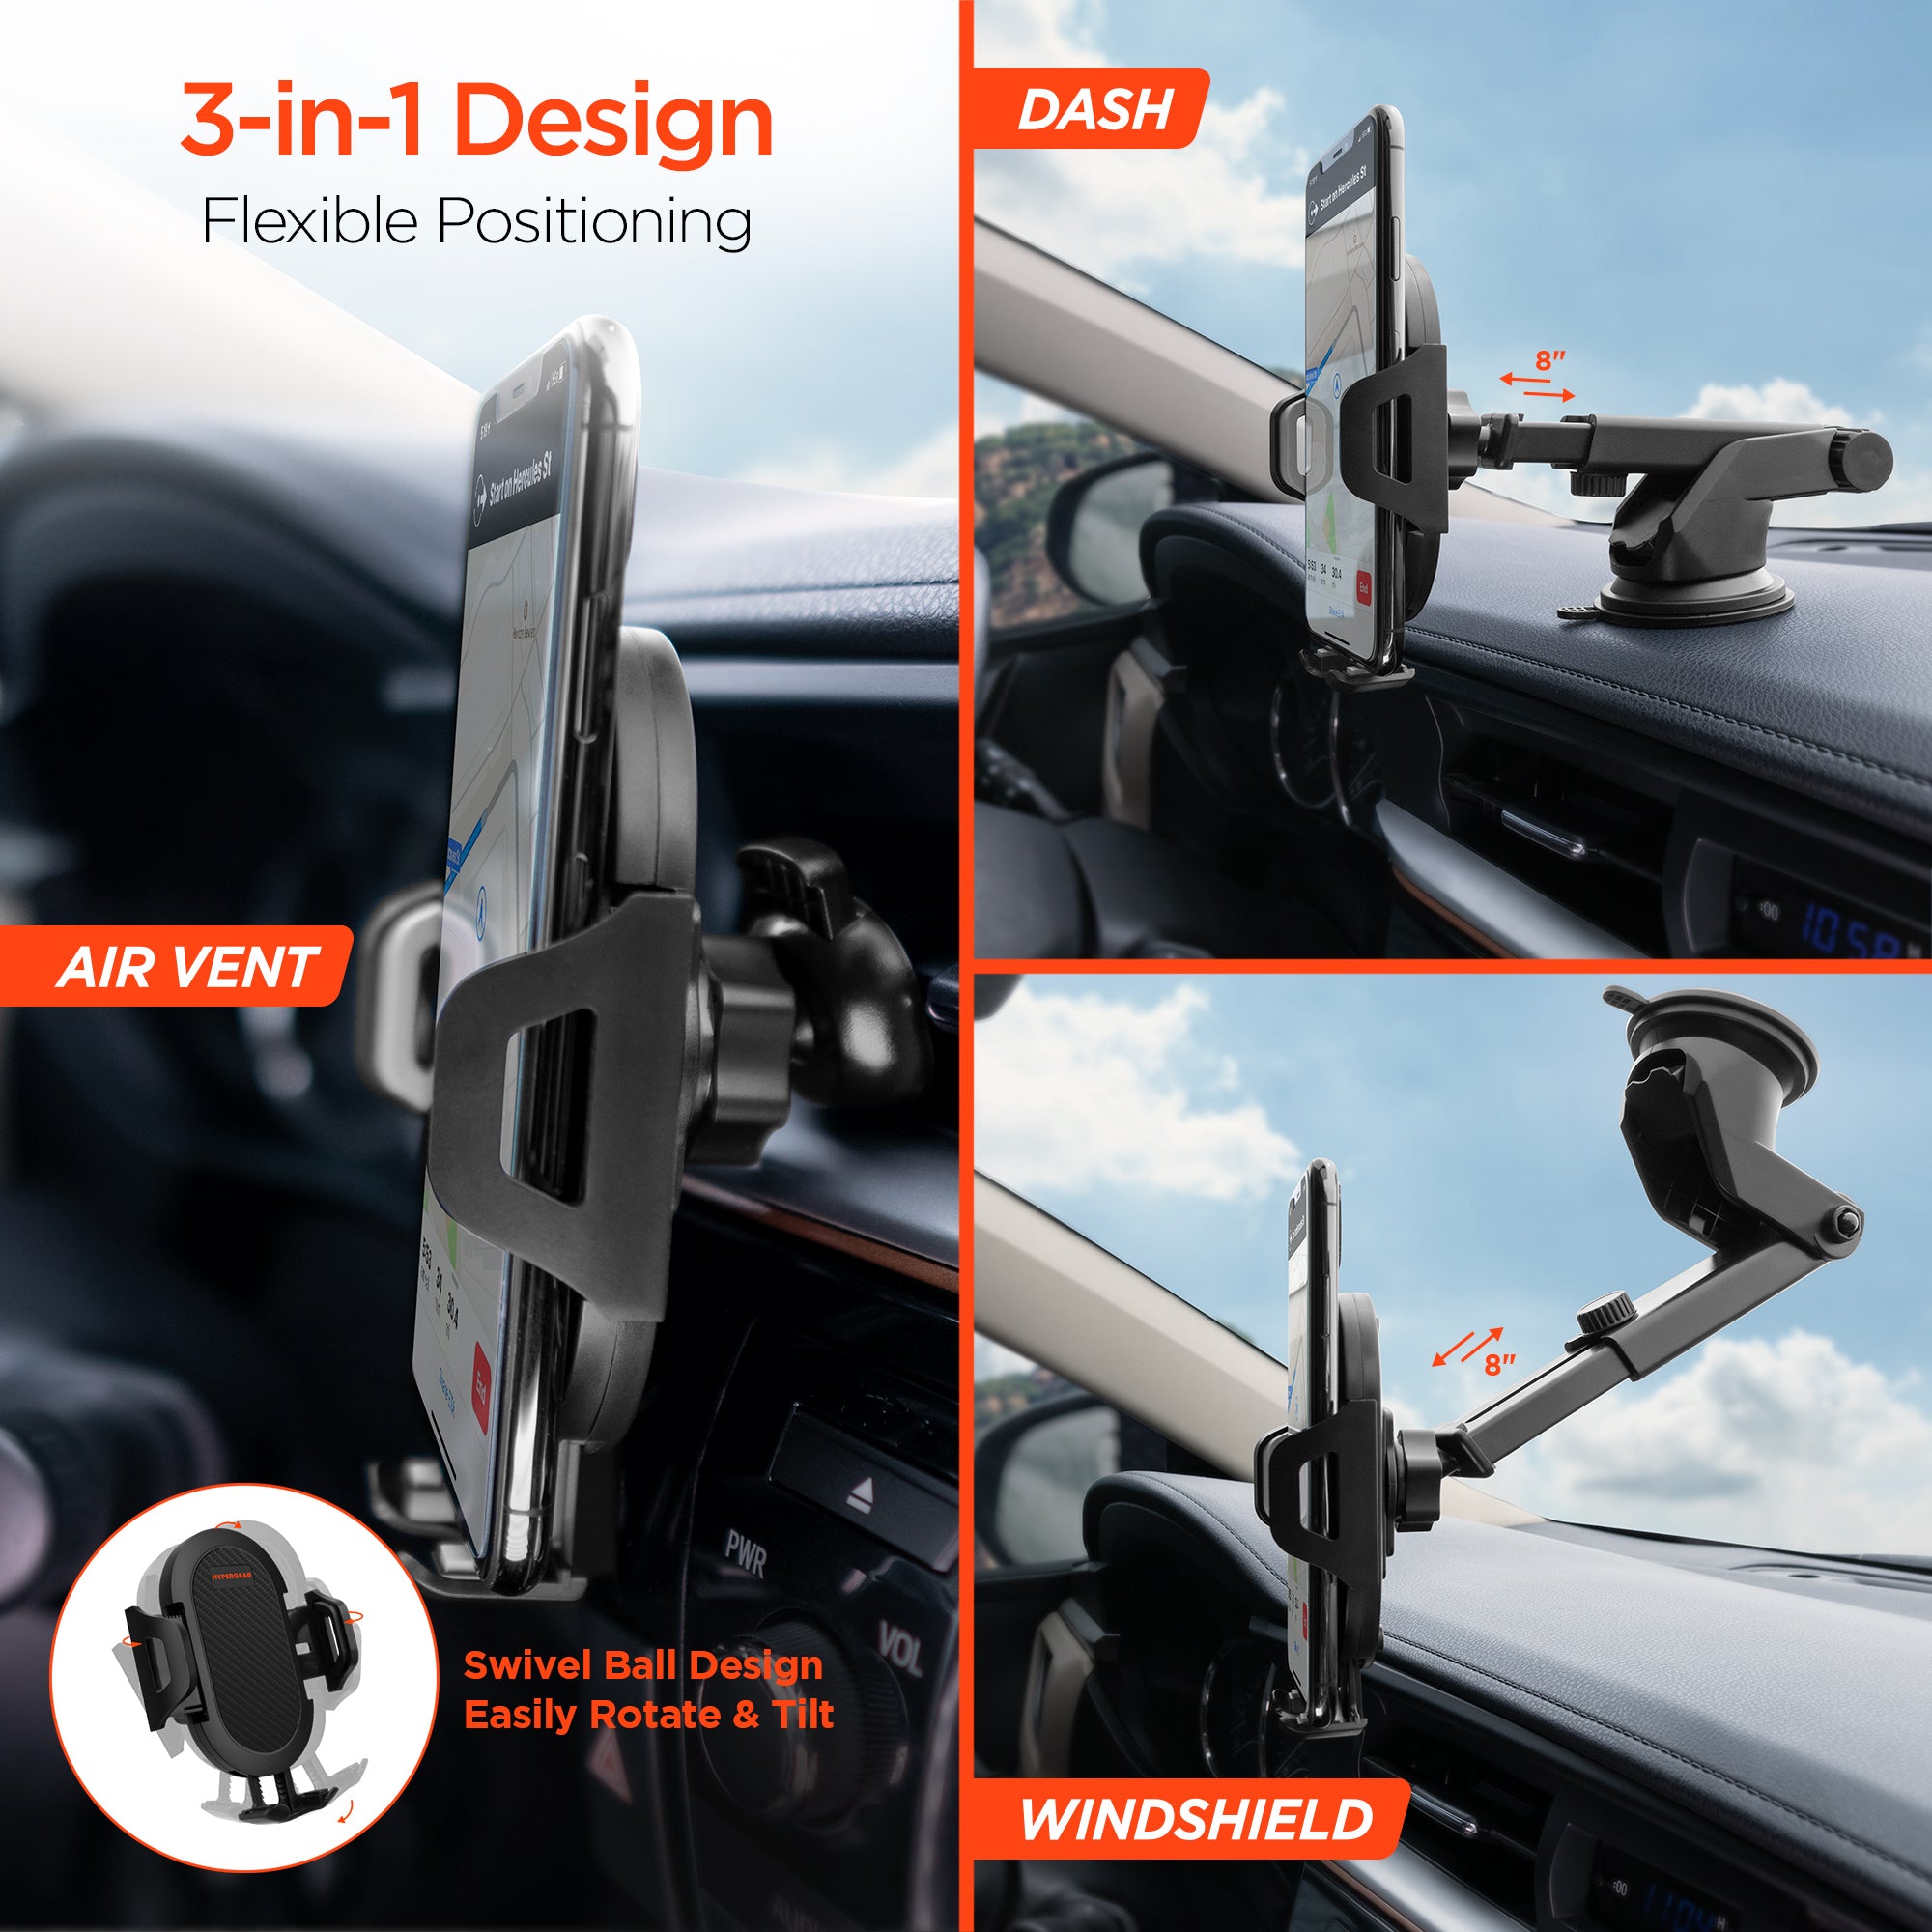 Car Phone Mount, Phone Holder for Car, Long Arm Suction Cup Phone Holder,  Strong Universal Hands-Free Suction Cell Phone Holder, Car Phone Holder  Mount for All Smartphone 